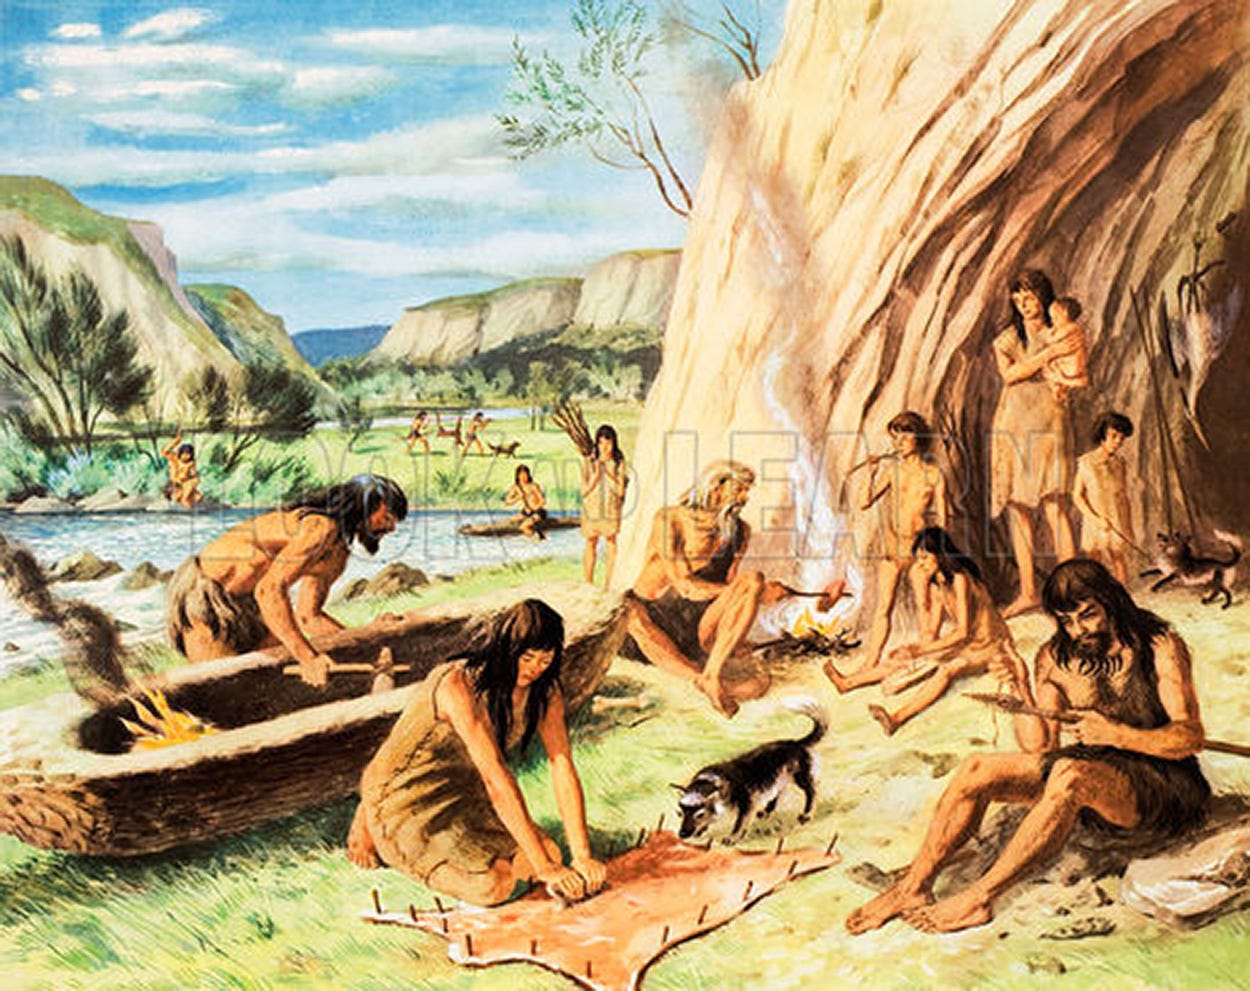 Was Stone Age life as savage and brutal as it is often depicted